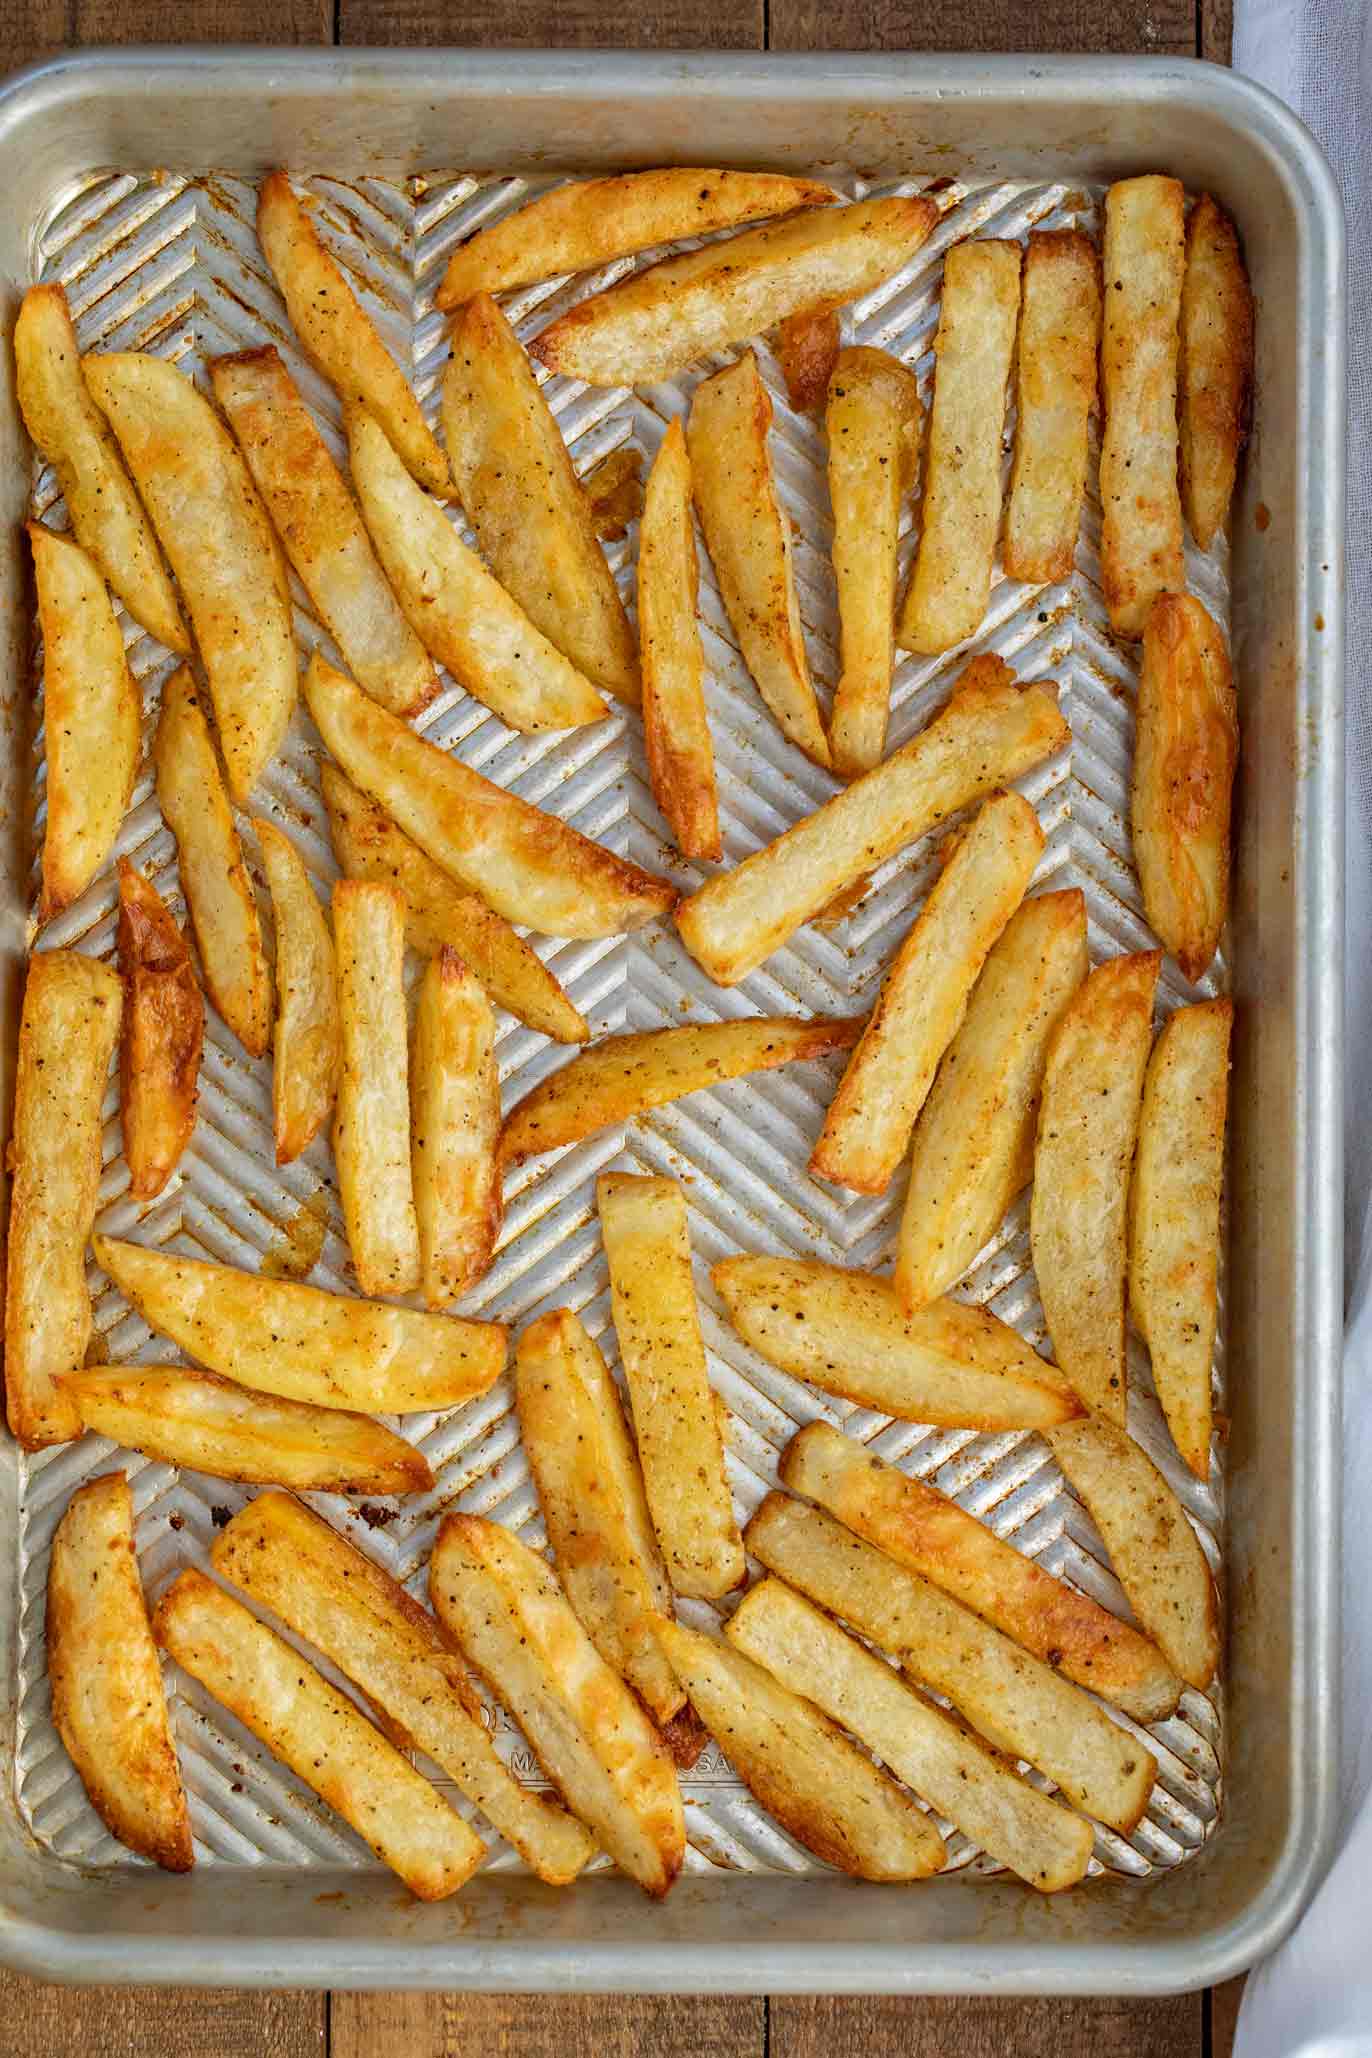 Baked French Fries - Cooking Made Healthy